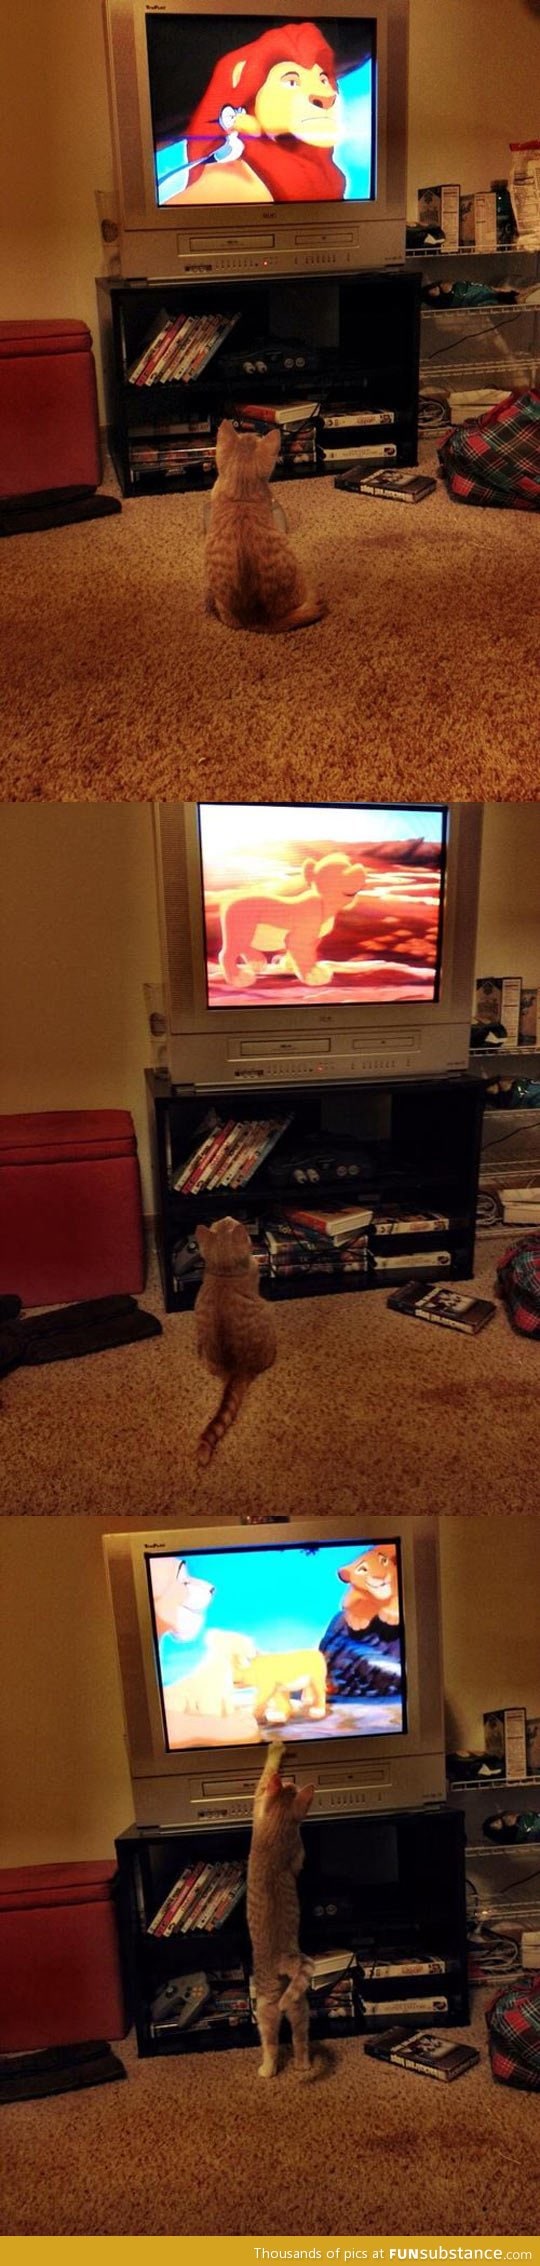 Everyone loves the lion king